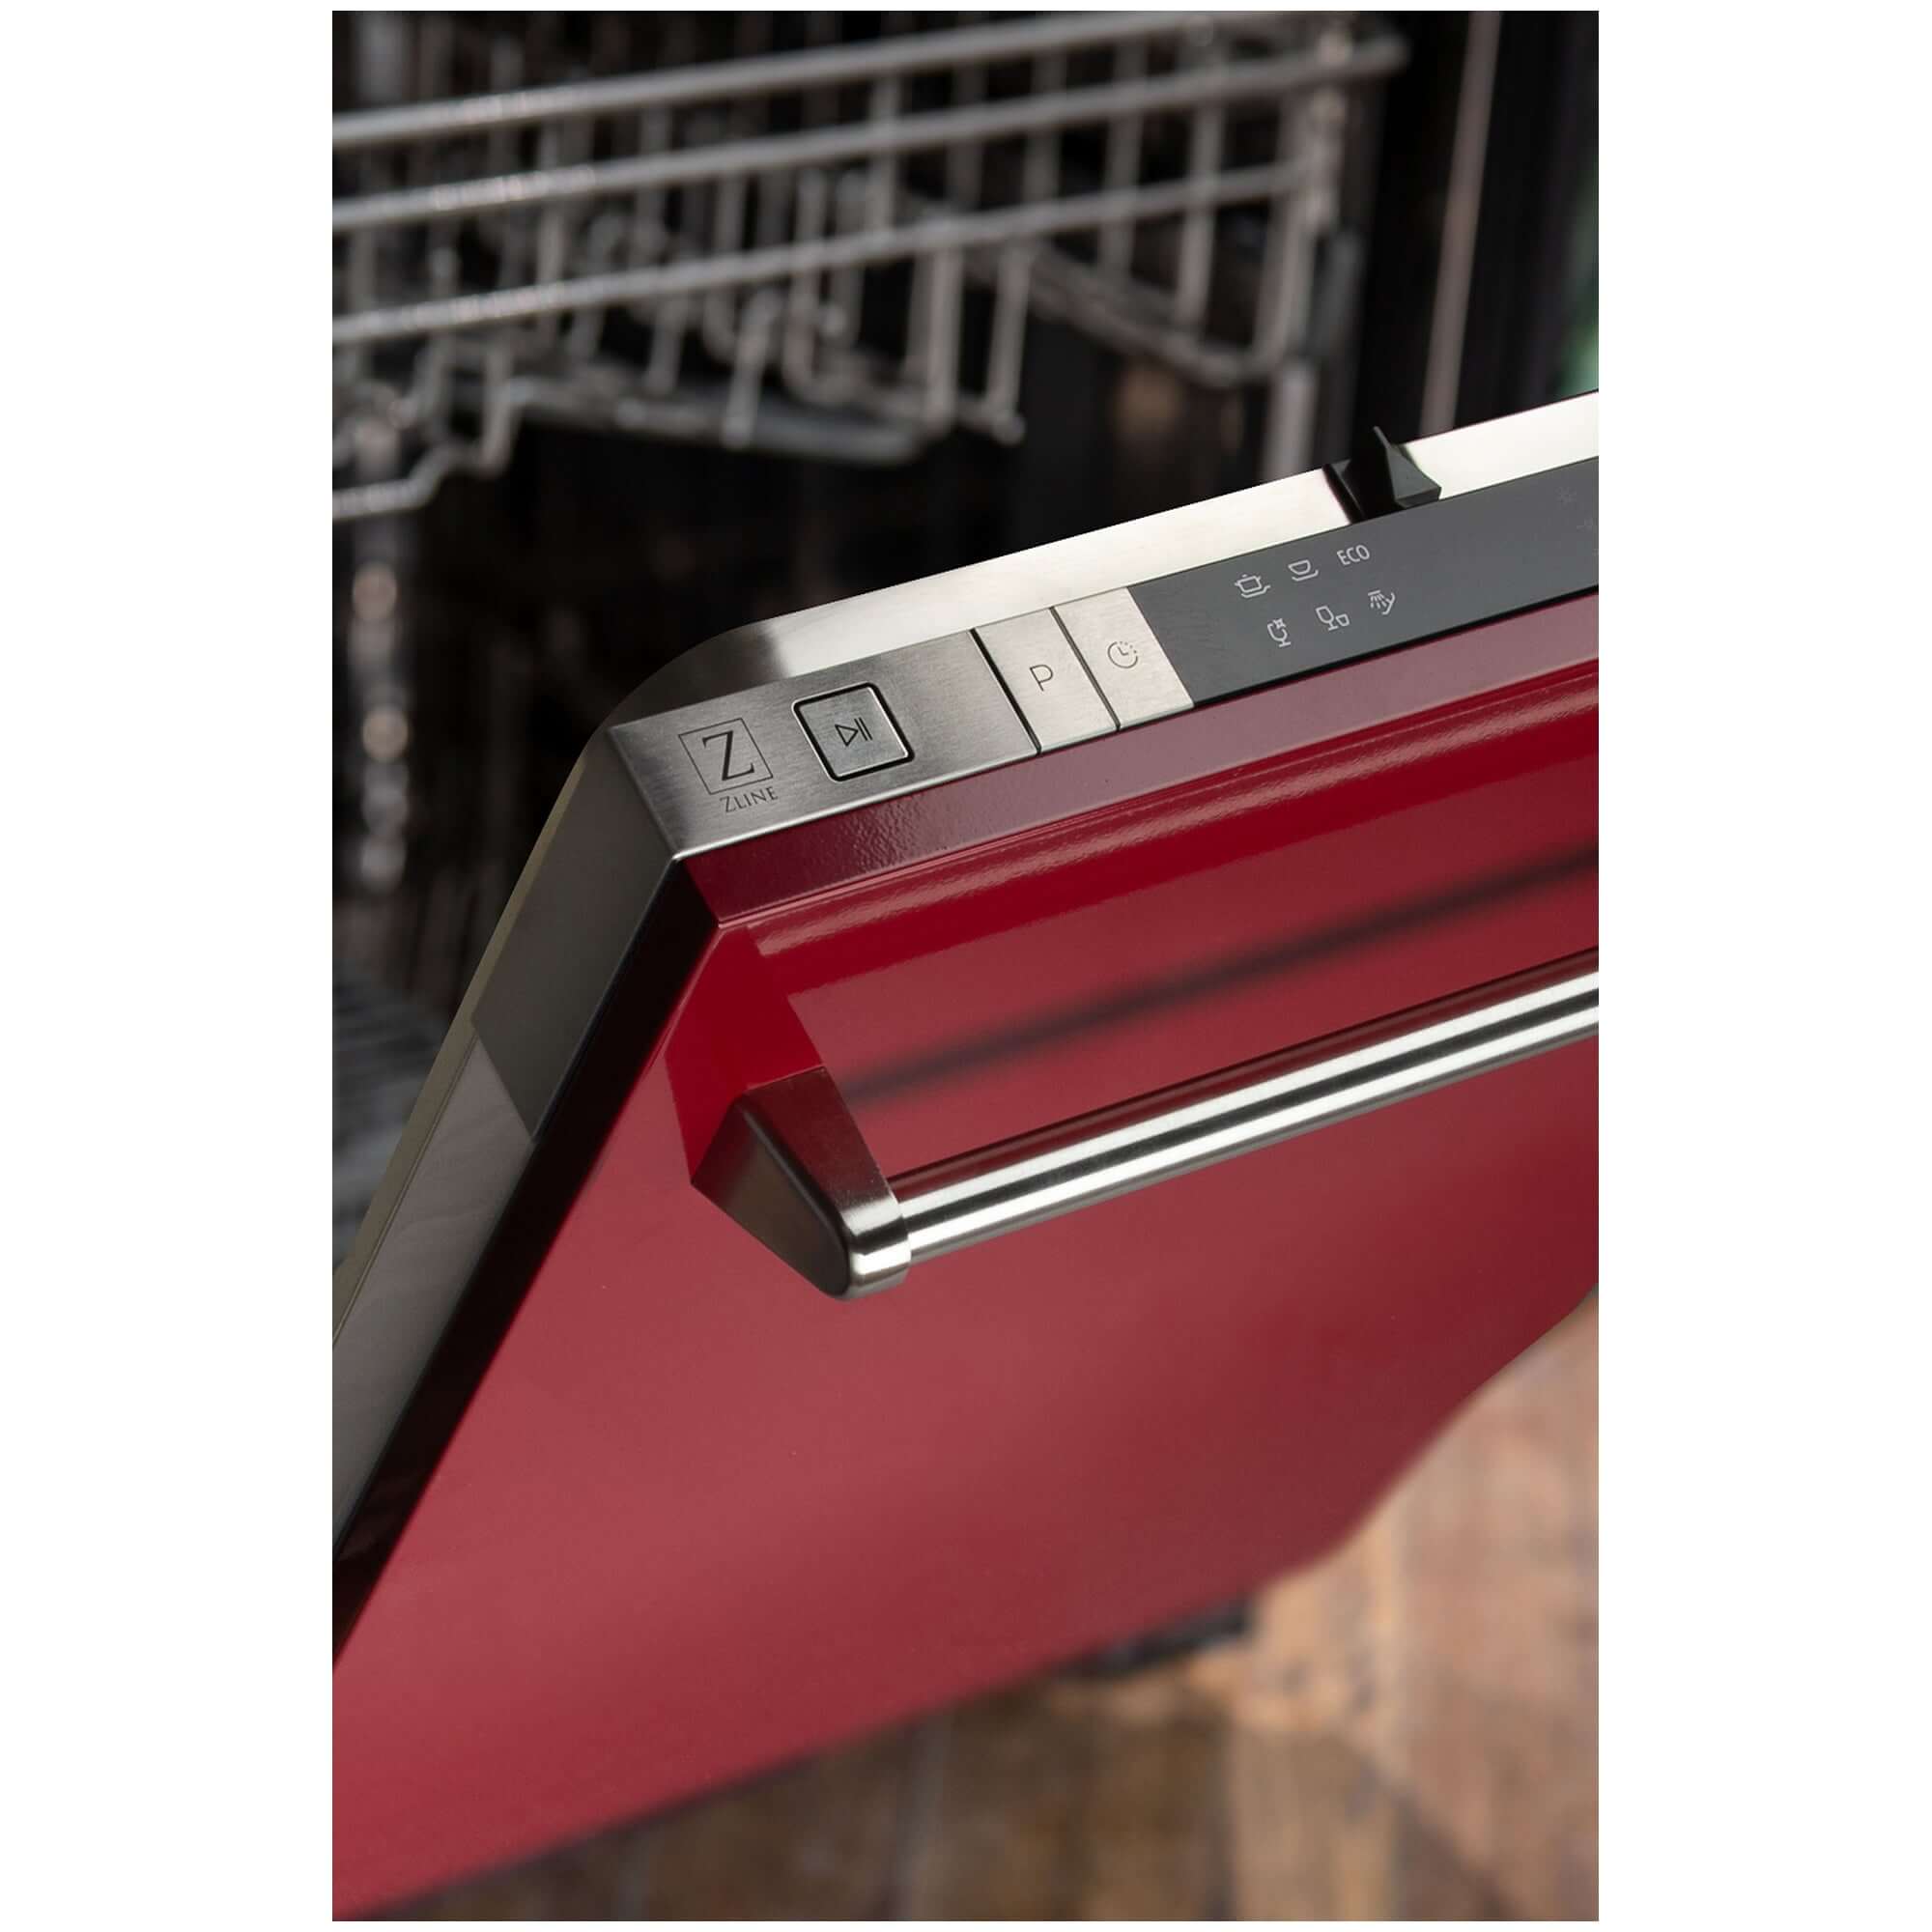 ZLINE 18 in. Compact Red Gloss Top Control Built-In Dishwasher with Stainless Steel Tub and Traditional Style Handle, 52dBa (DW-RG-18)